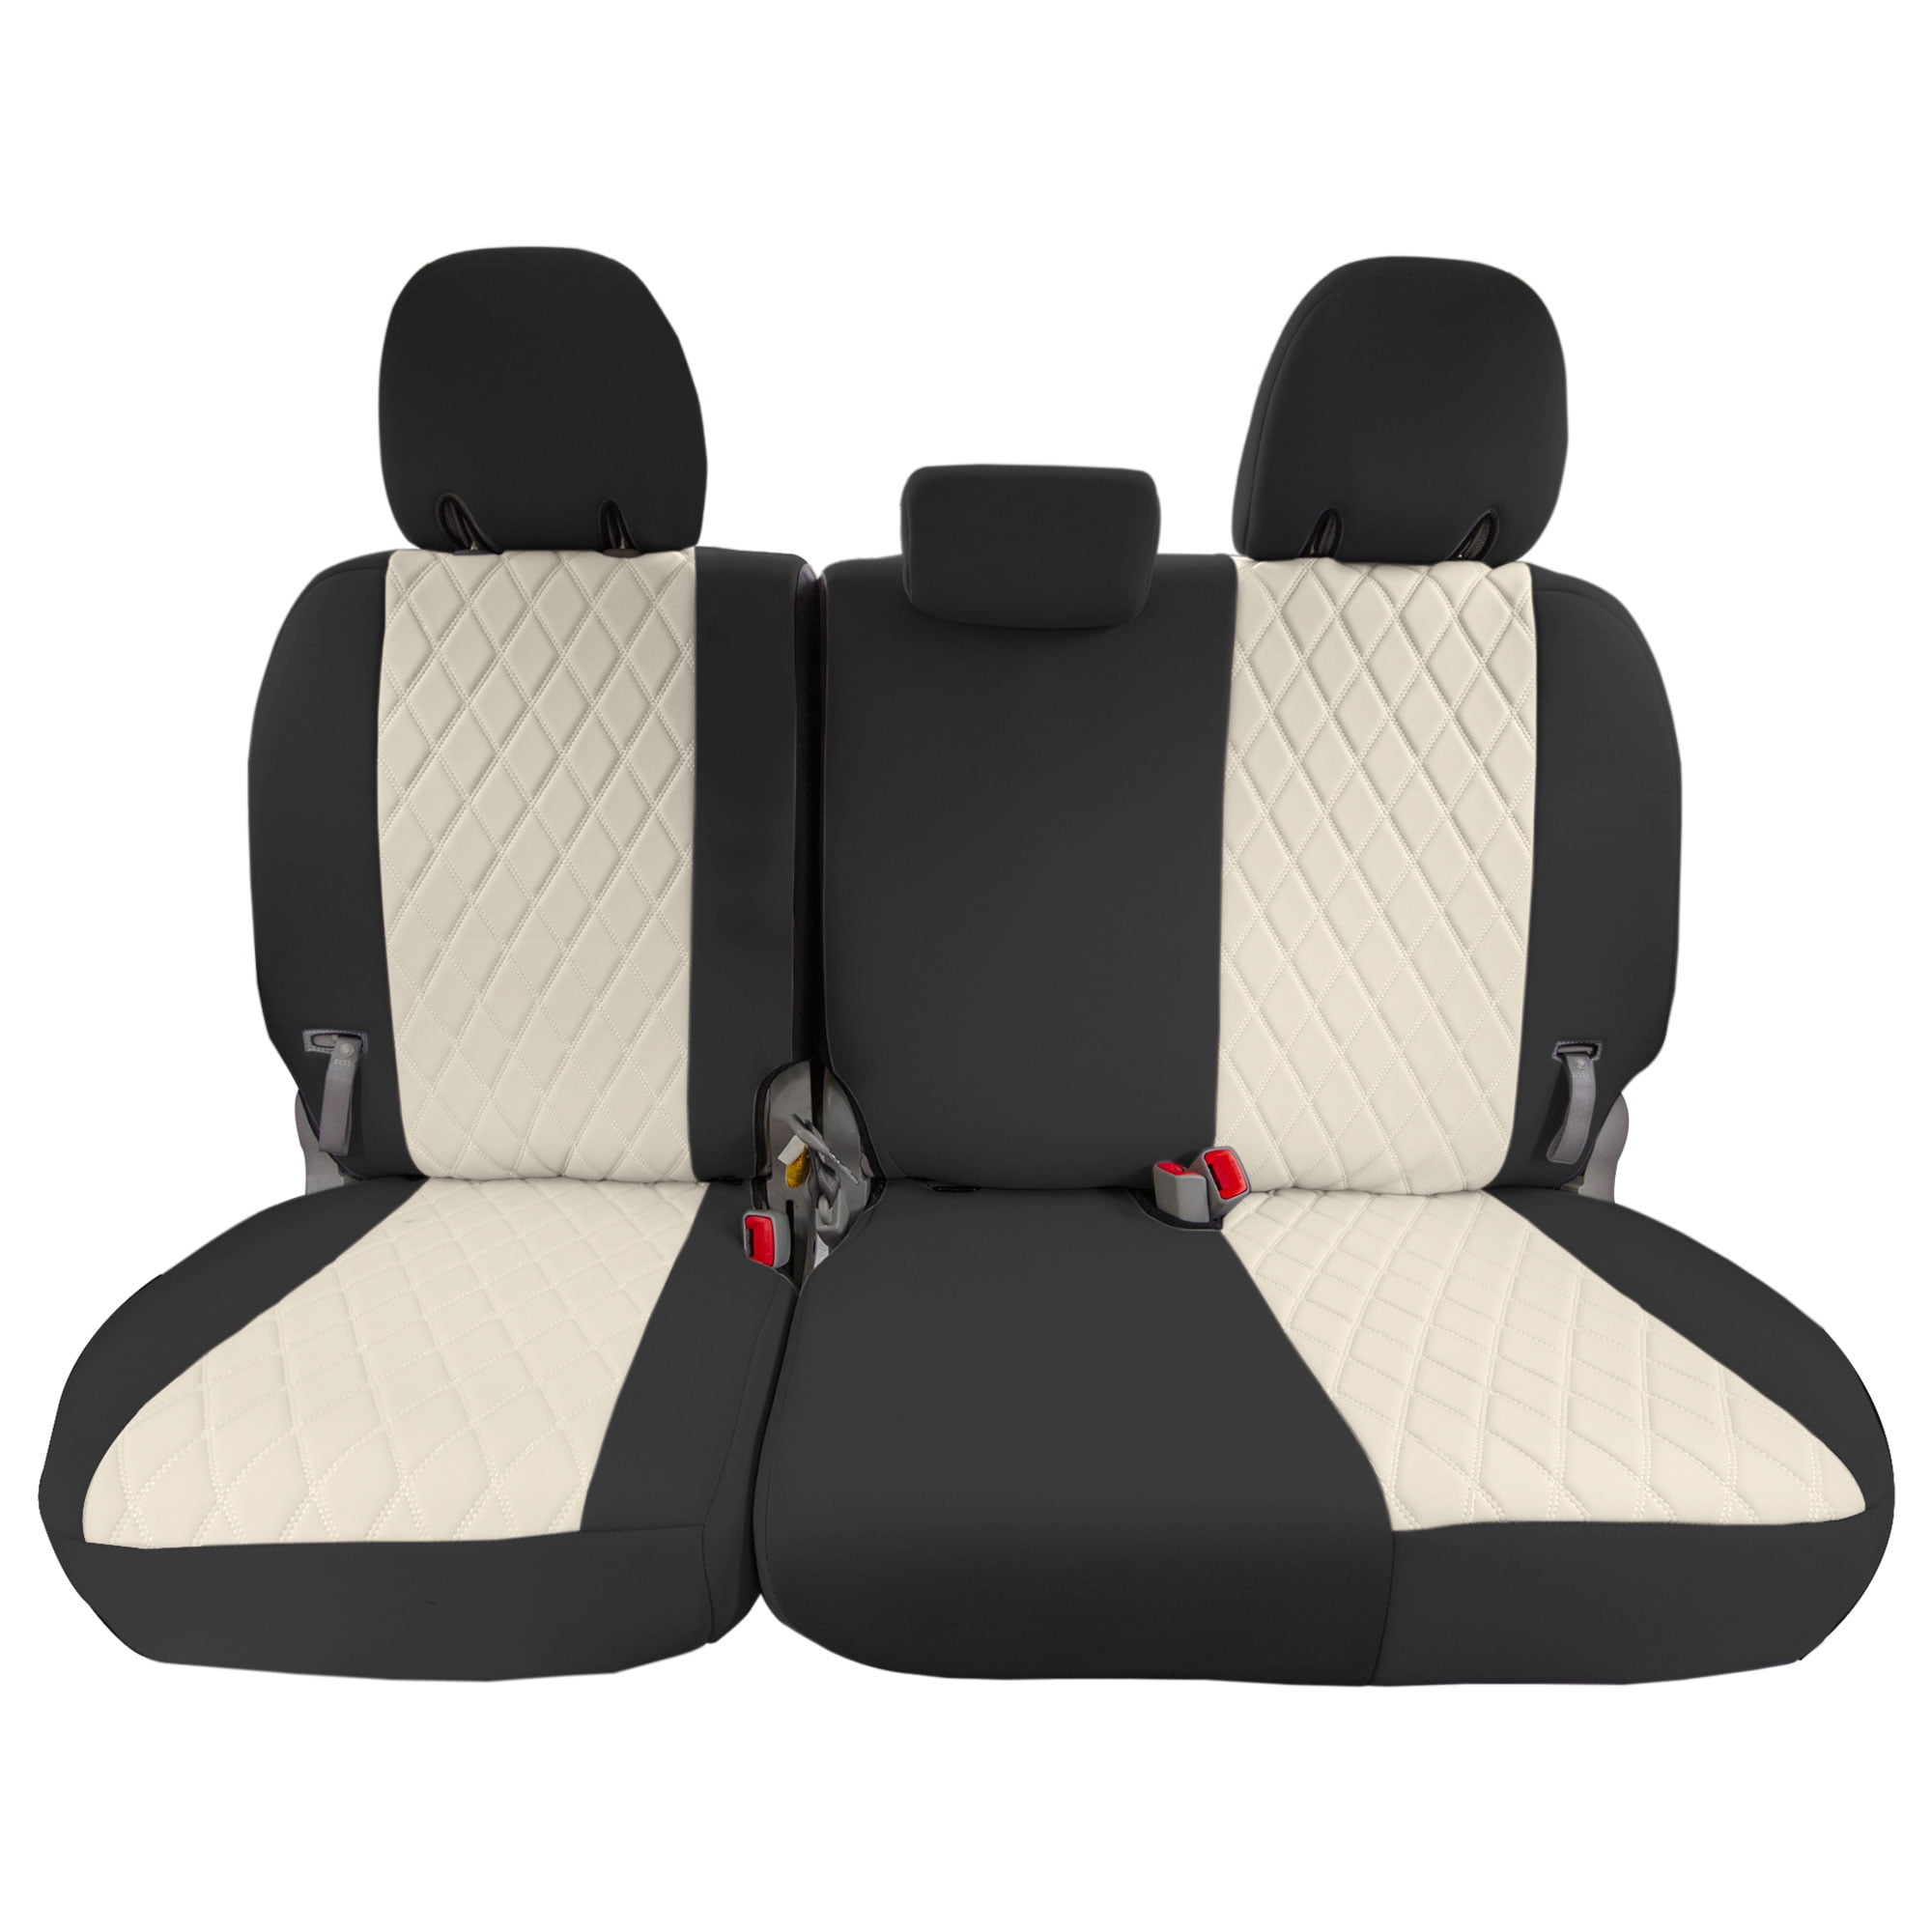 FH Neoprene, and in Covers Fit Covers for Washable Automotive Middle Cover Custom Car Seat Seat Set, Seat Waterproof Toyota Seat Group Car Beige Covers Sienna 2011-2020,